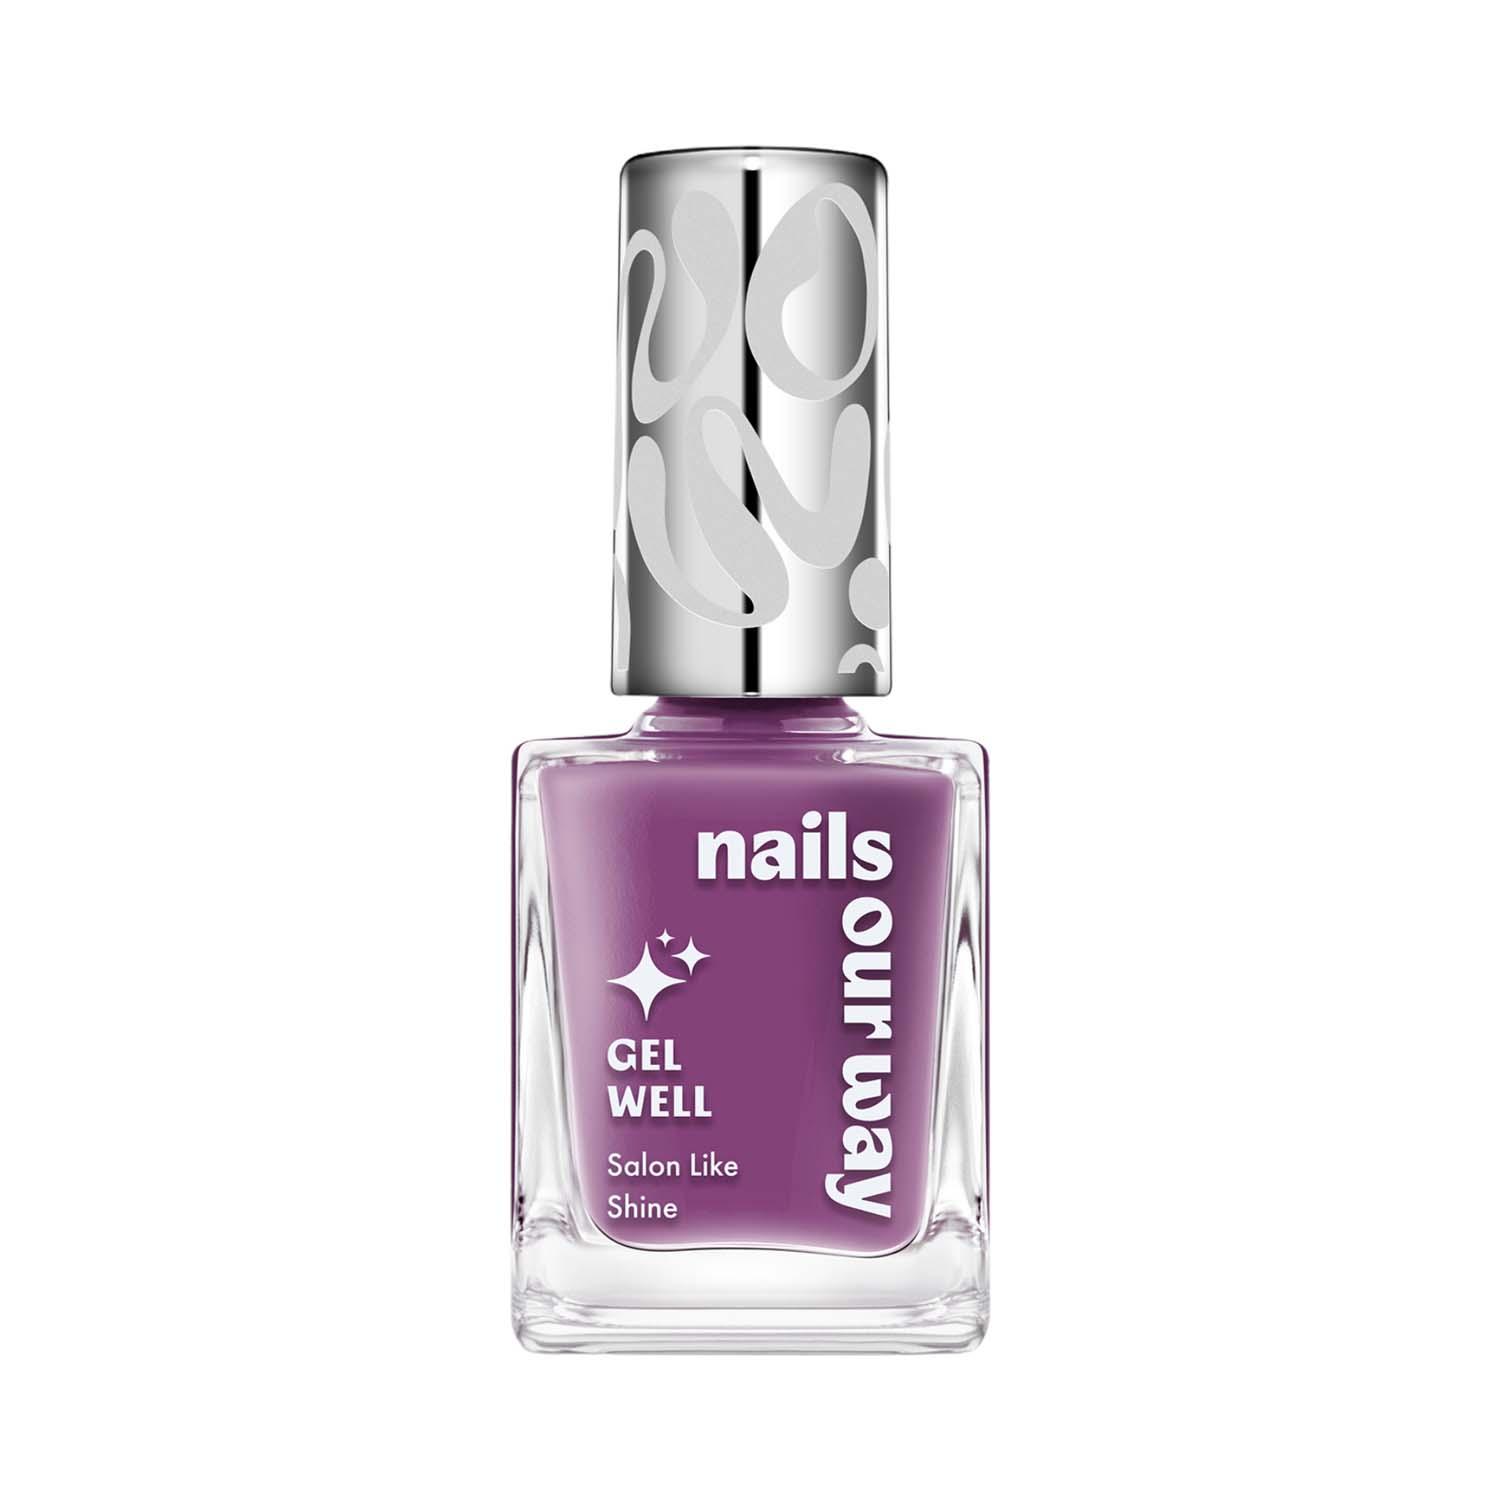 Nails Our Way | Nails Our Way Gel Well Nail Enamel - 215 Dominant (10 ml)